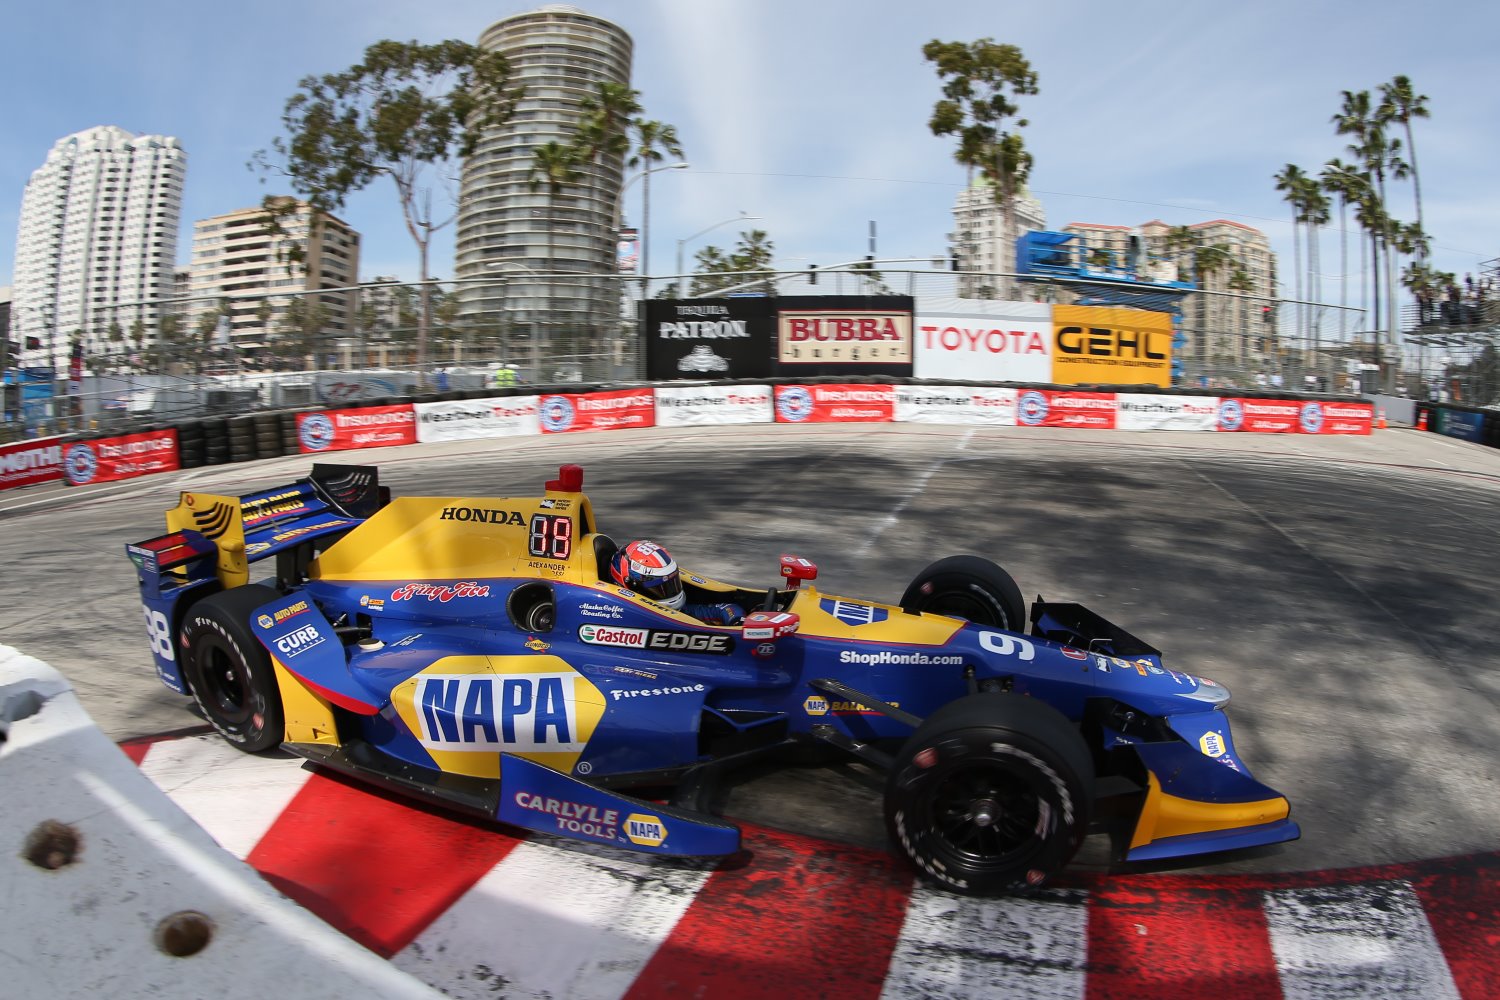 Long Beach owes ALexander Rossi. Last year he led the race easily until his Honda engine popped.